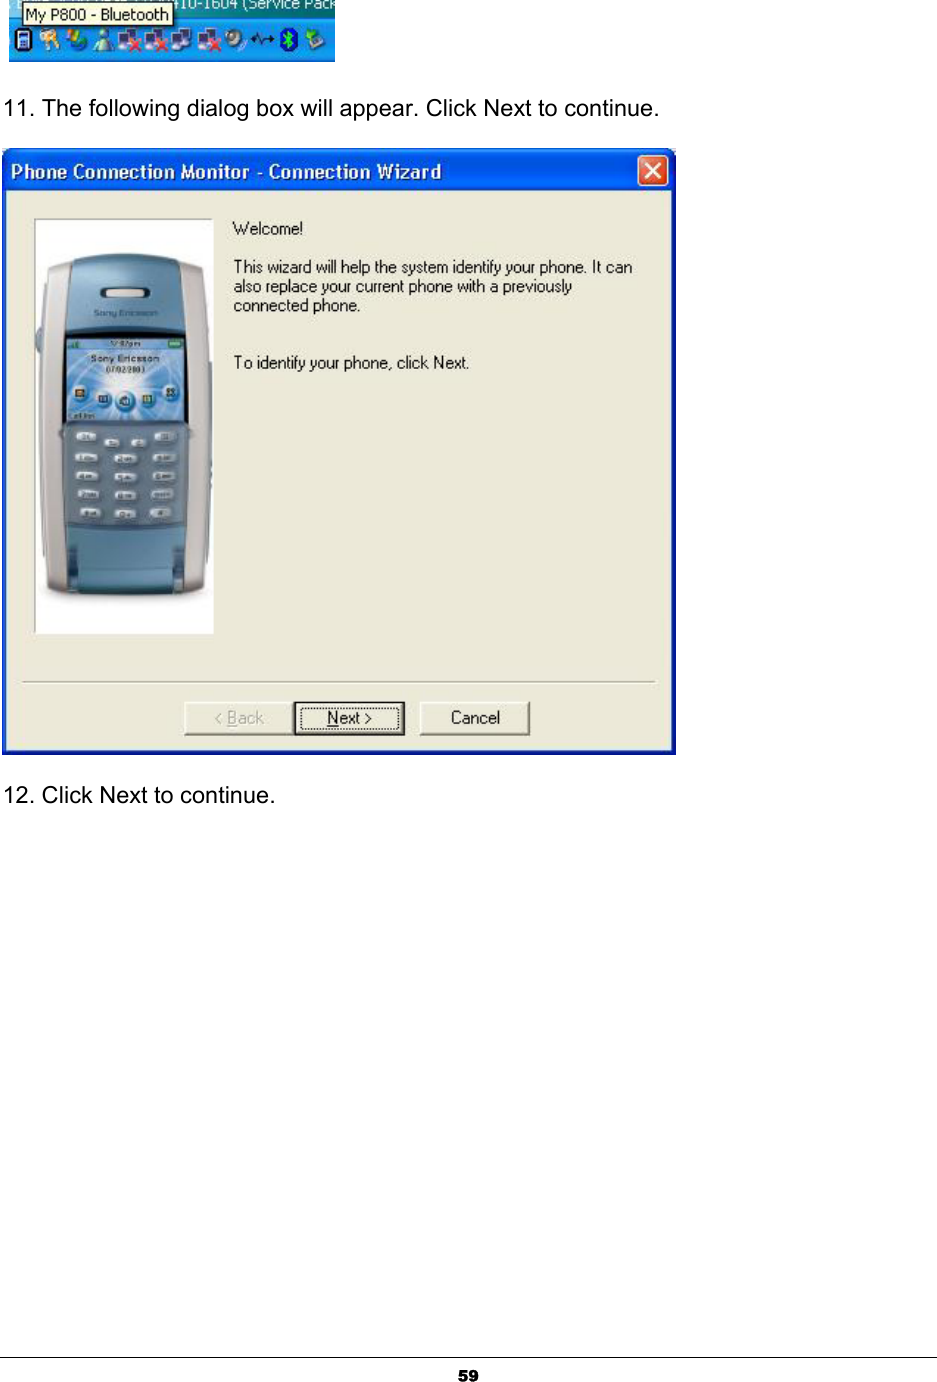   59   11. The following dialog box will appear. Click Next to continue.  12. Click Next to continue. 